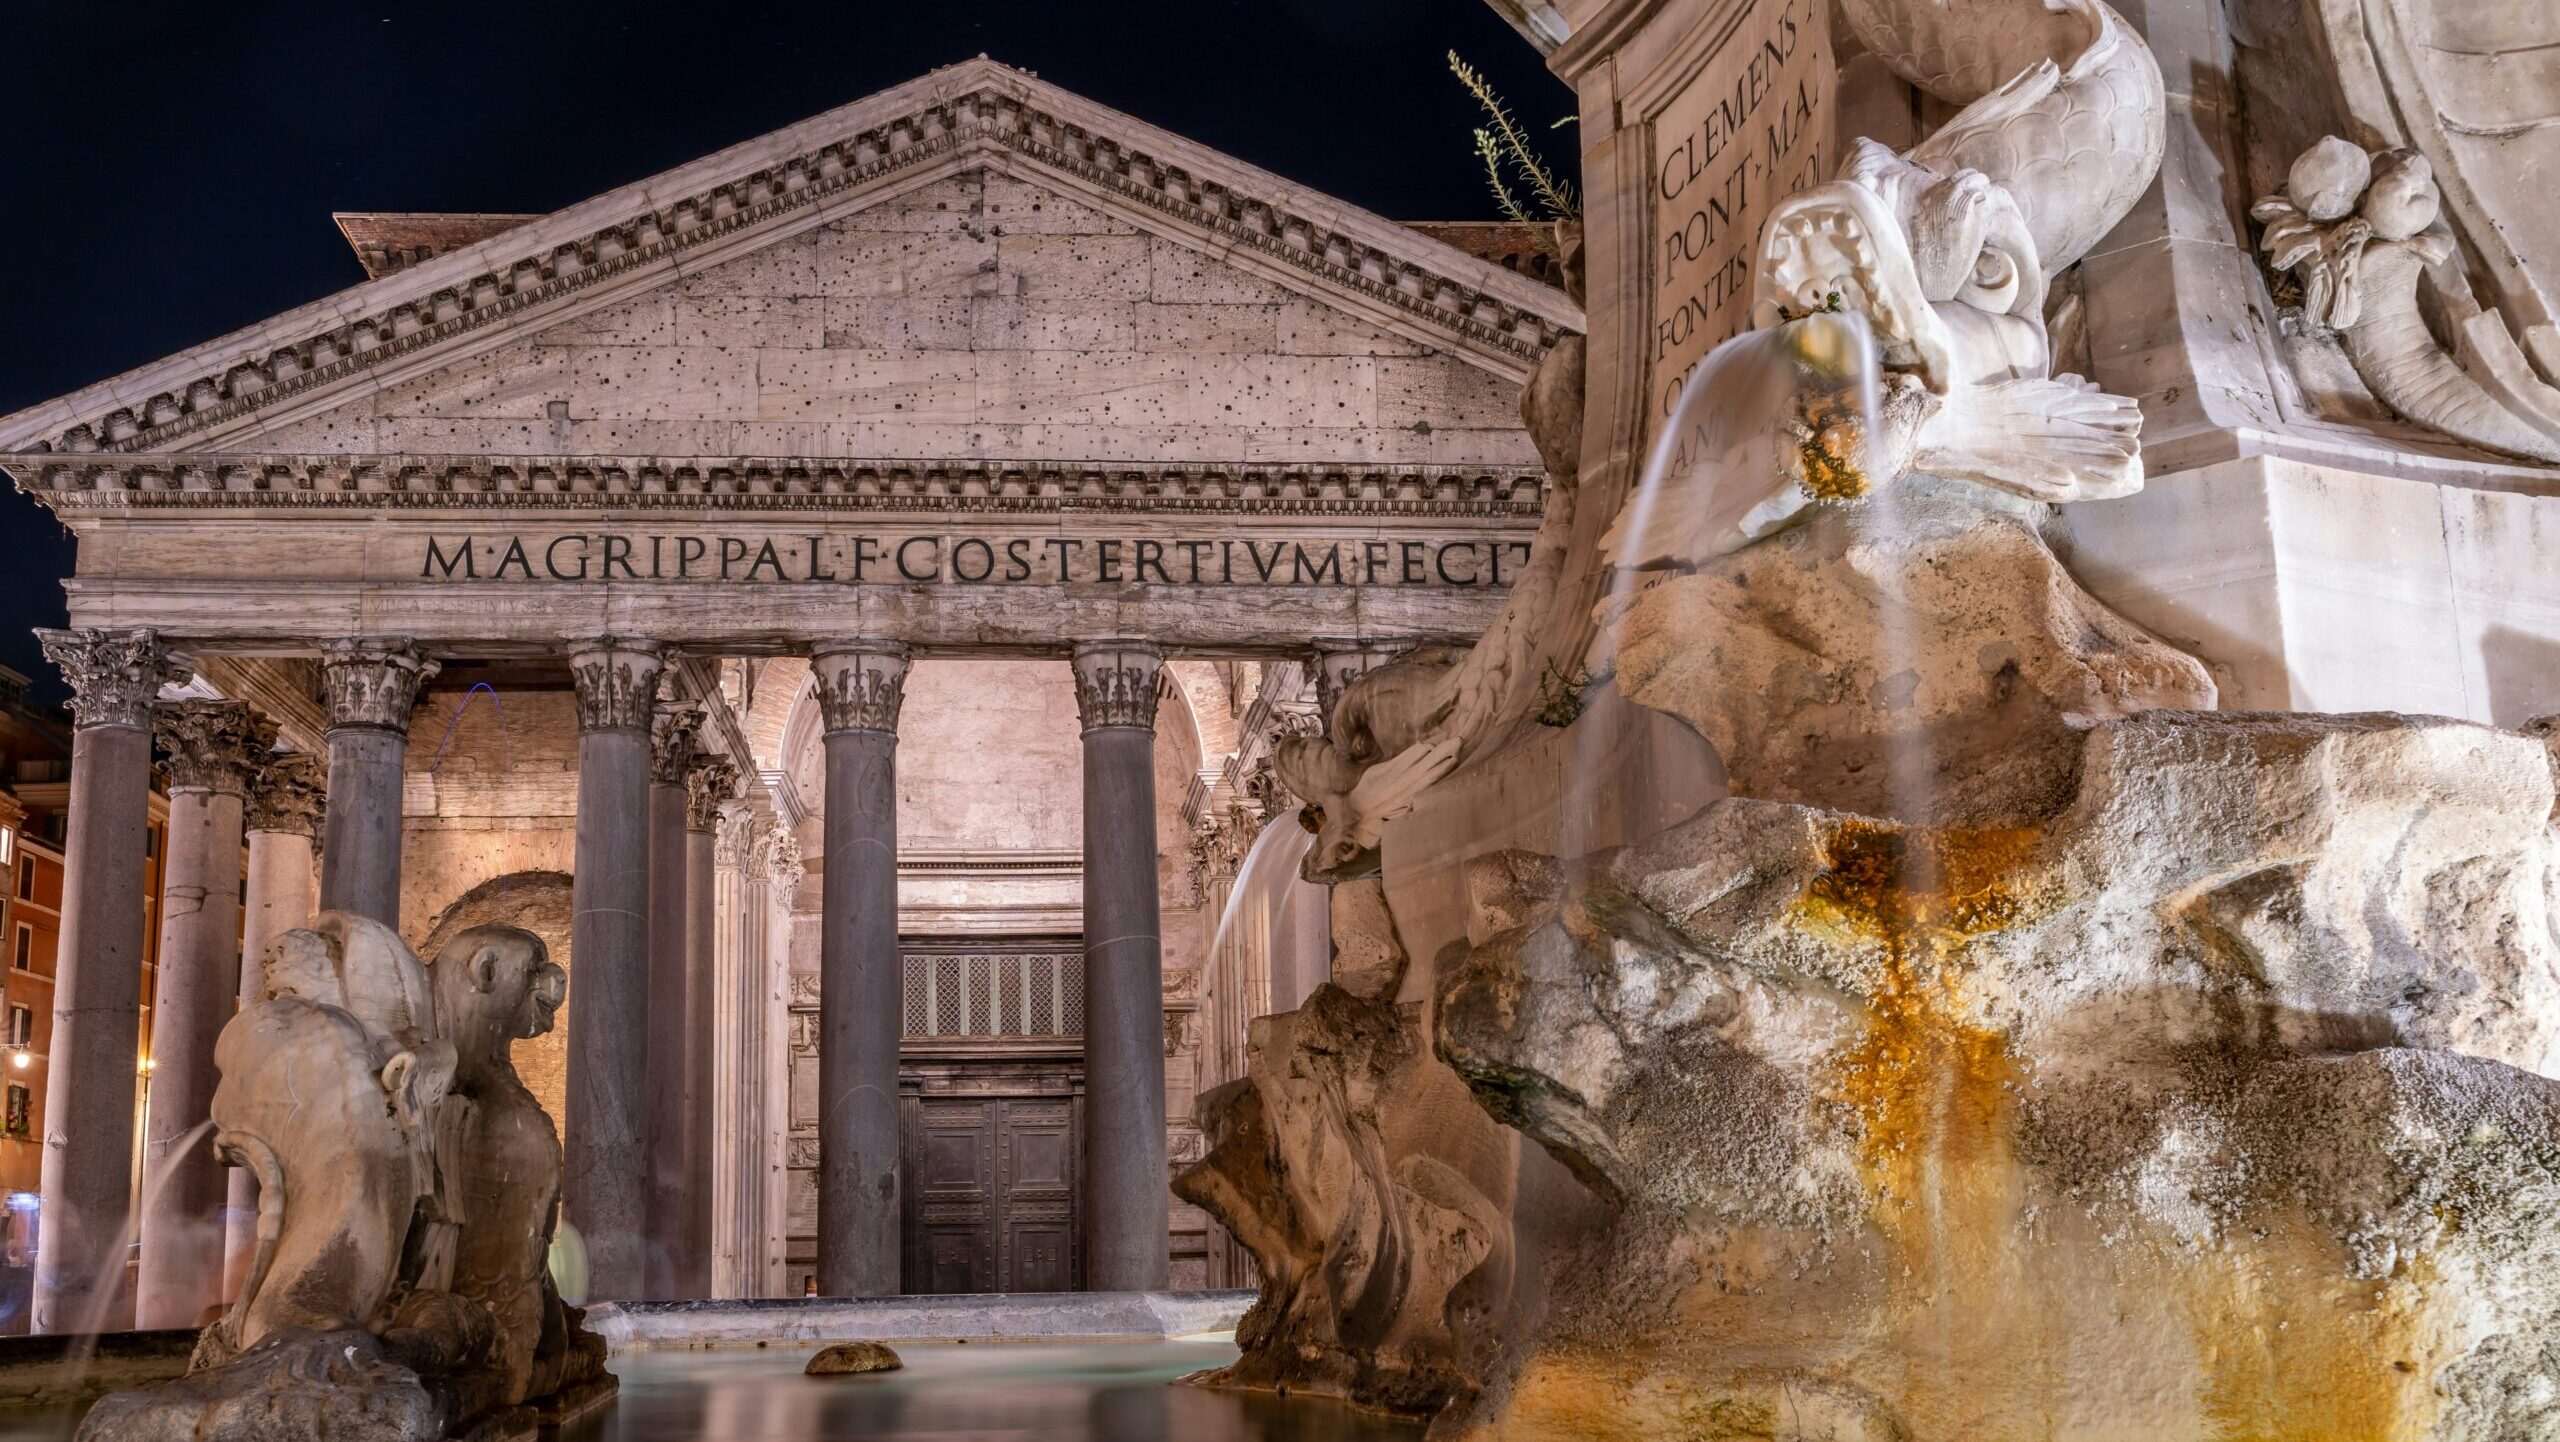 Rome's Forum, photographed at night, with the Pantheon Fountain in the foreground